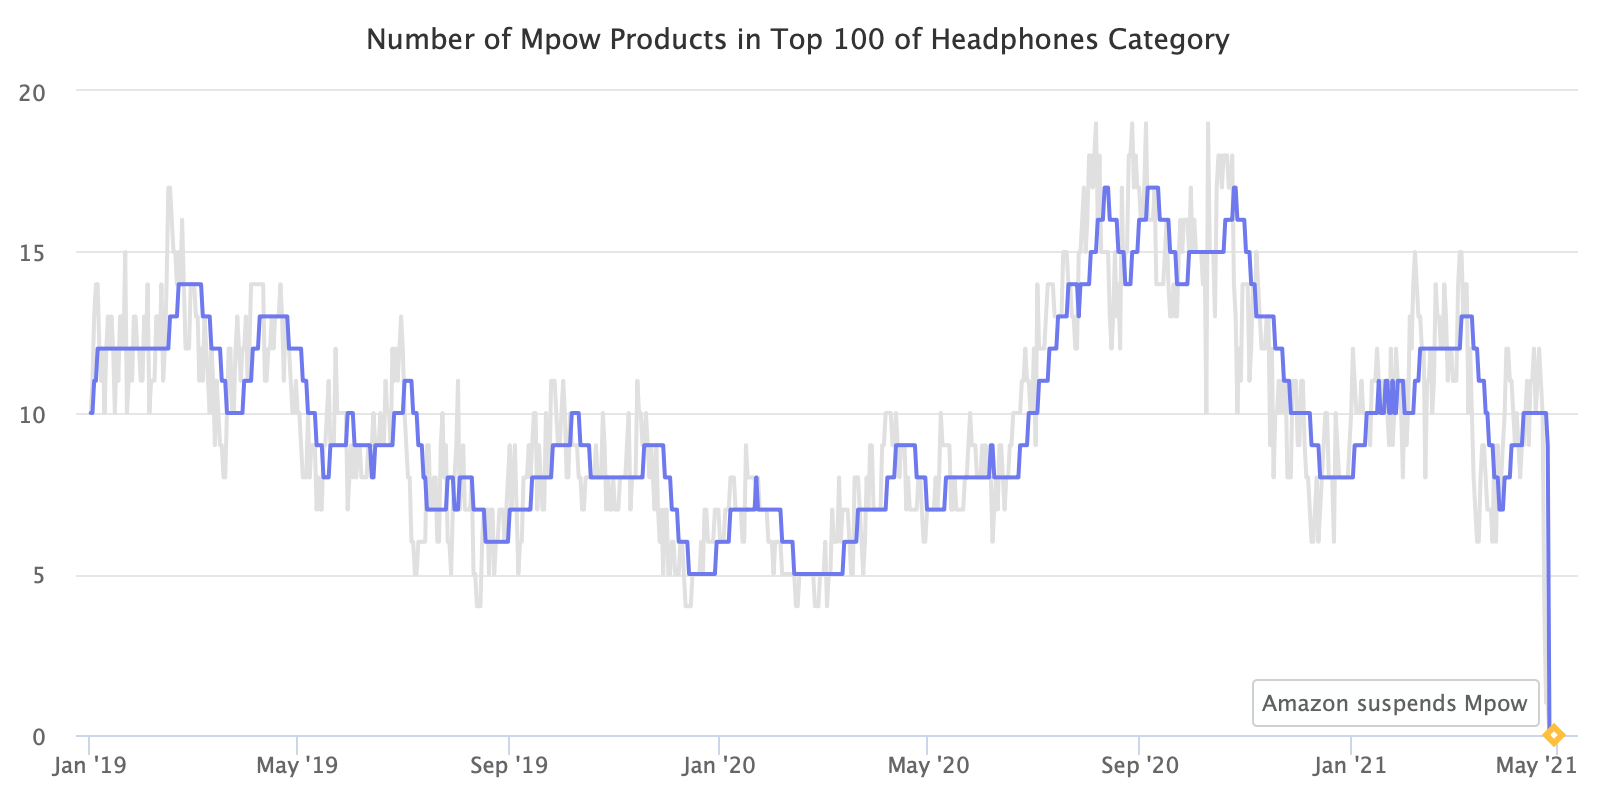 Number of Mpow Products in Top 100 of Headphones Category